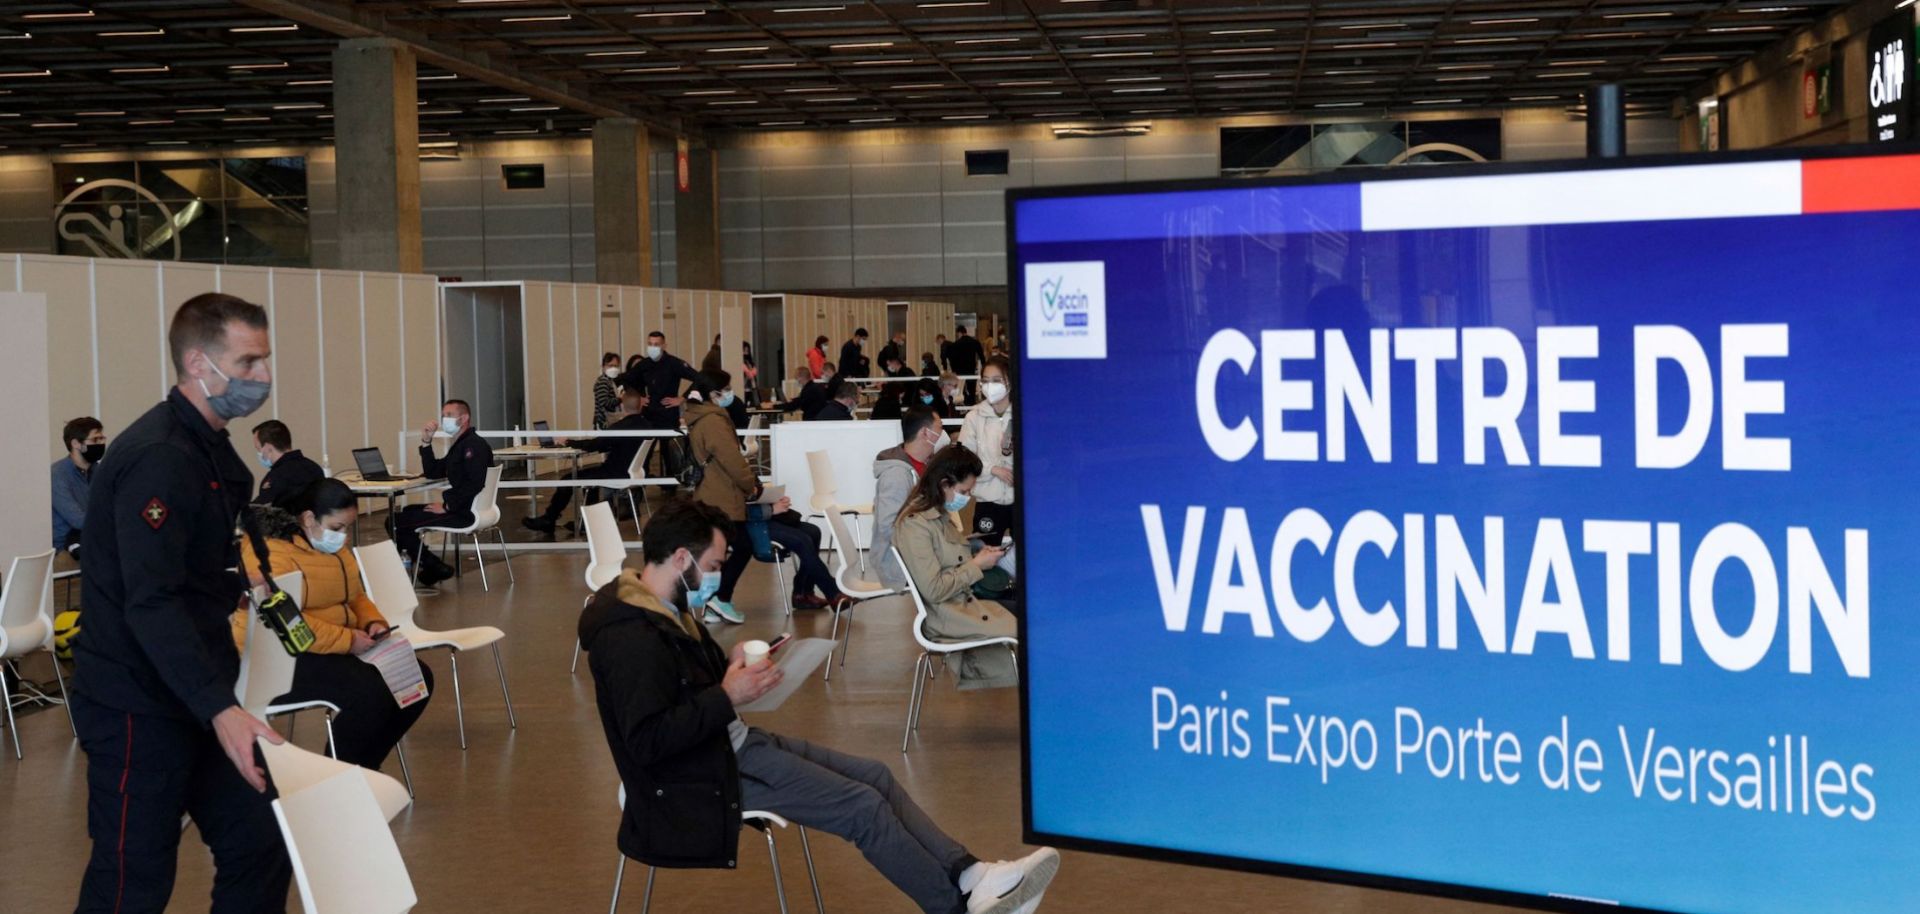 People wait to be vaccinated at the COVID-19 vaccination center May 15, 2021, at the Porte de Versailles in Paris.